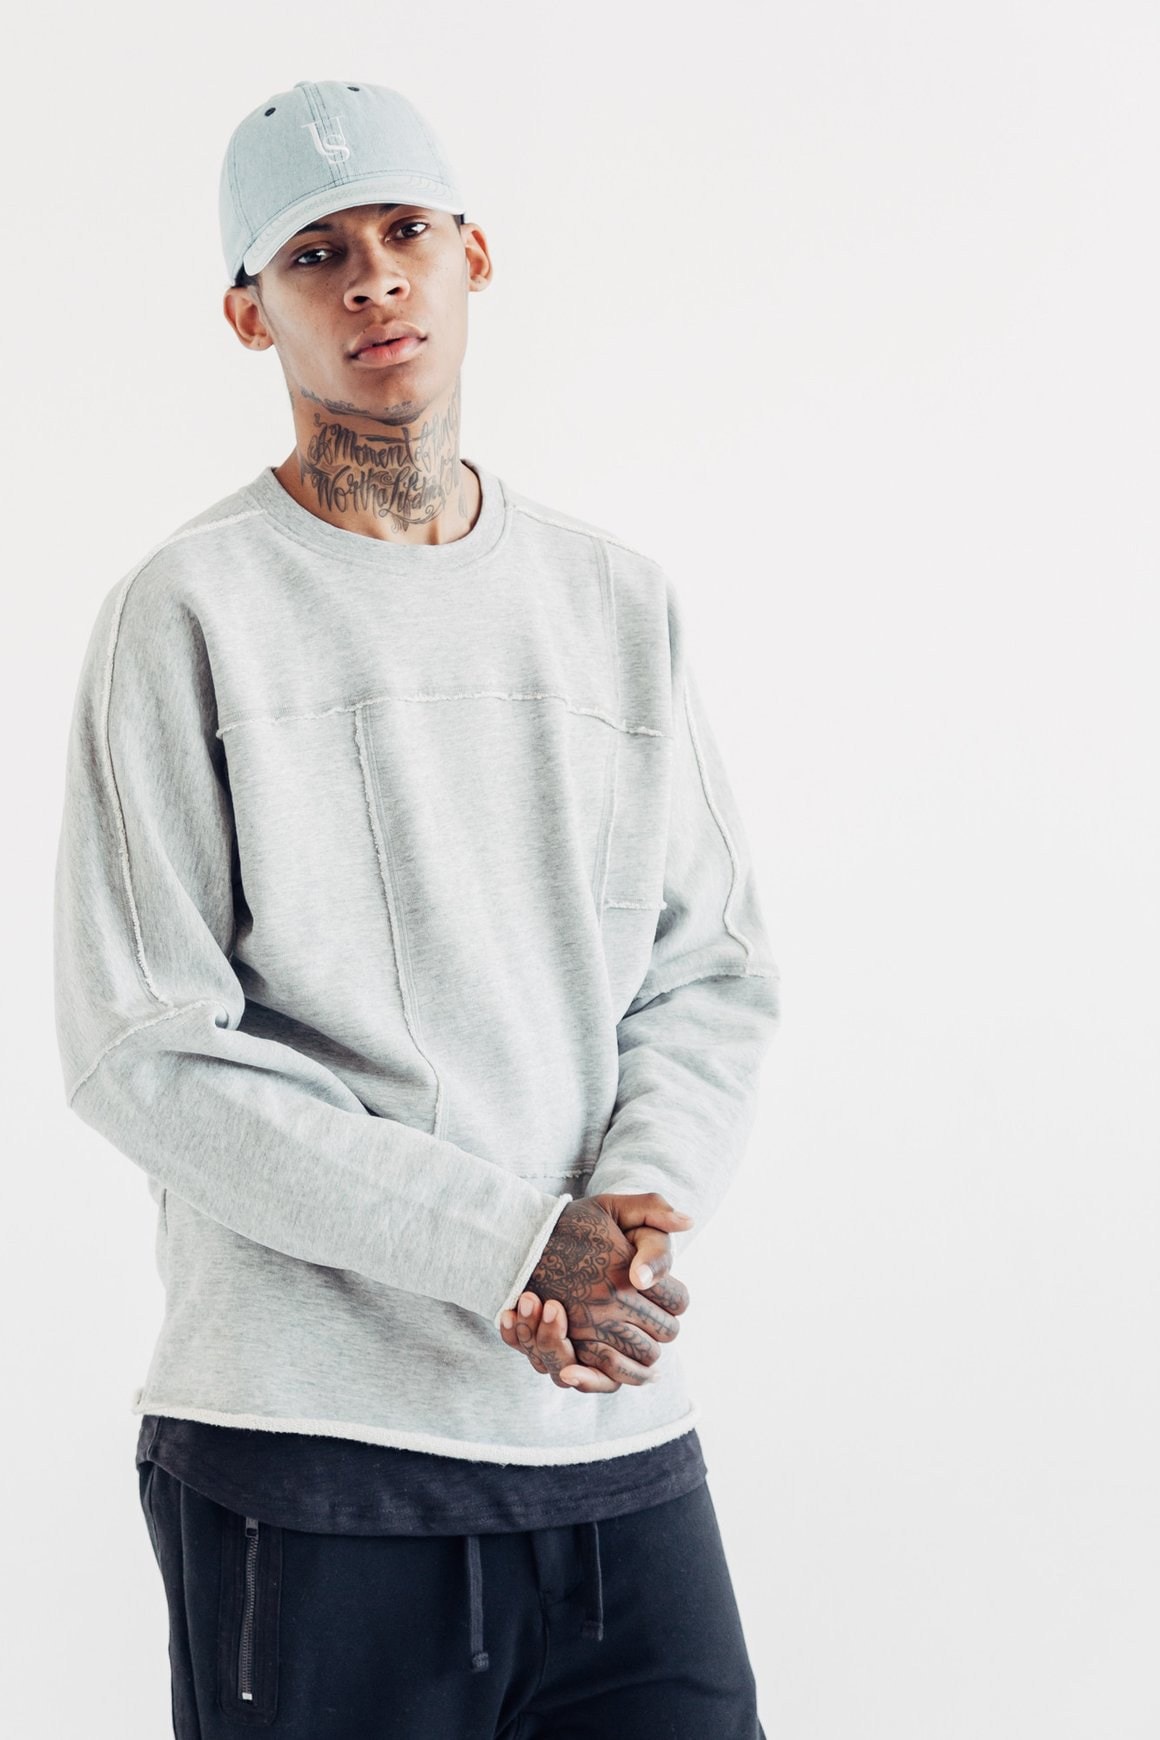 kith 2017 spring second delivery